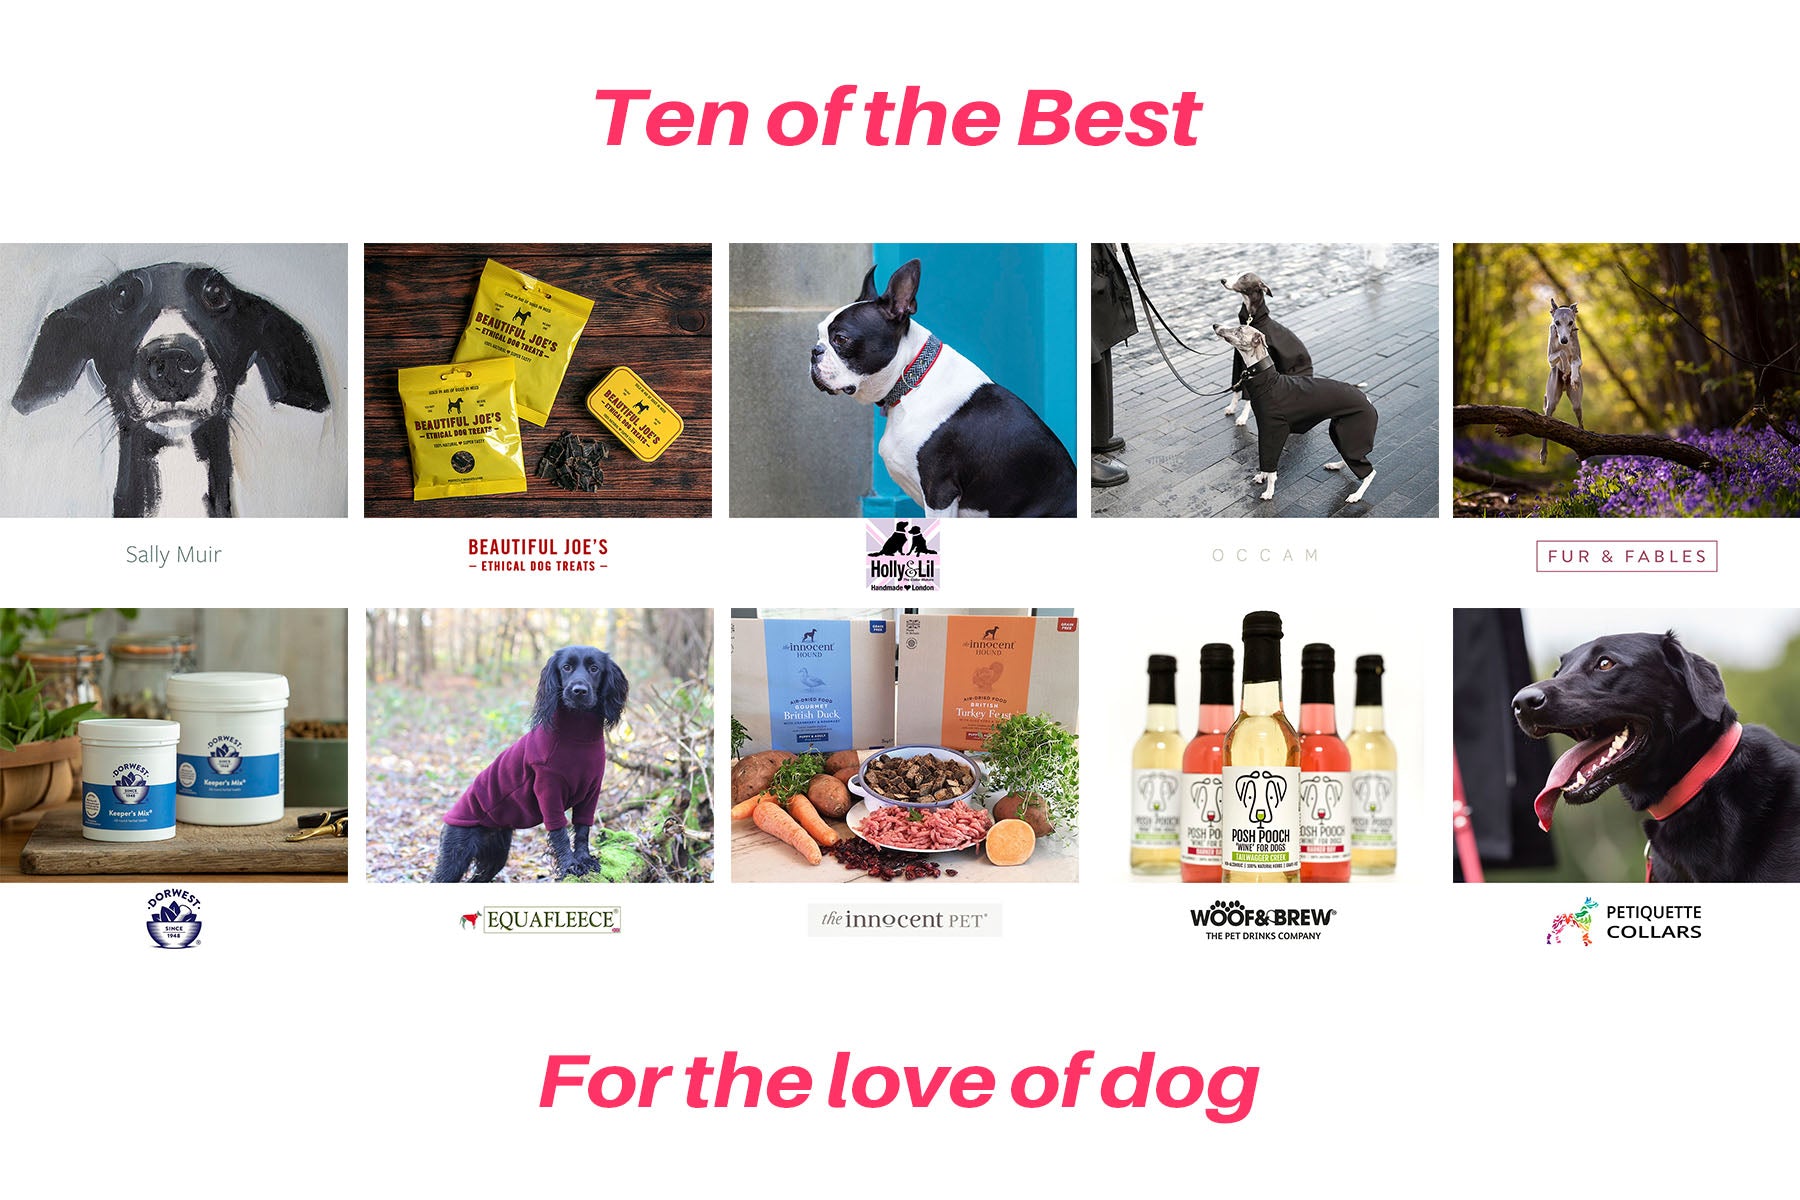 Ten of the Best - brands and people all for the love of dog